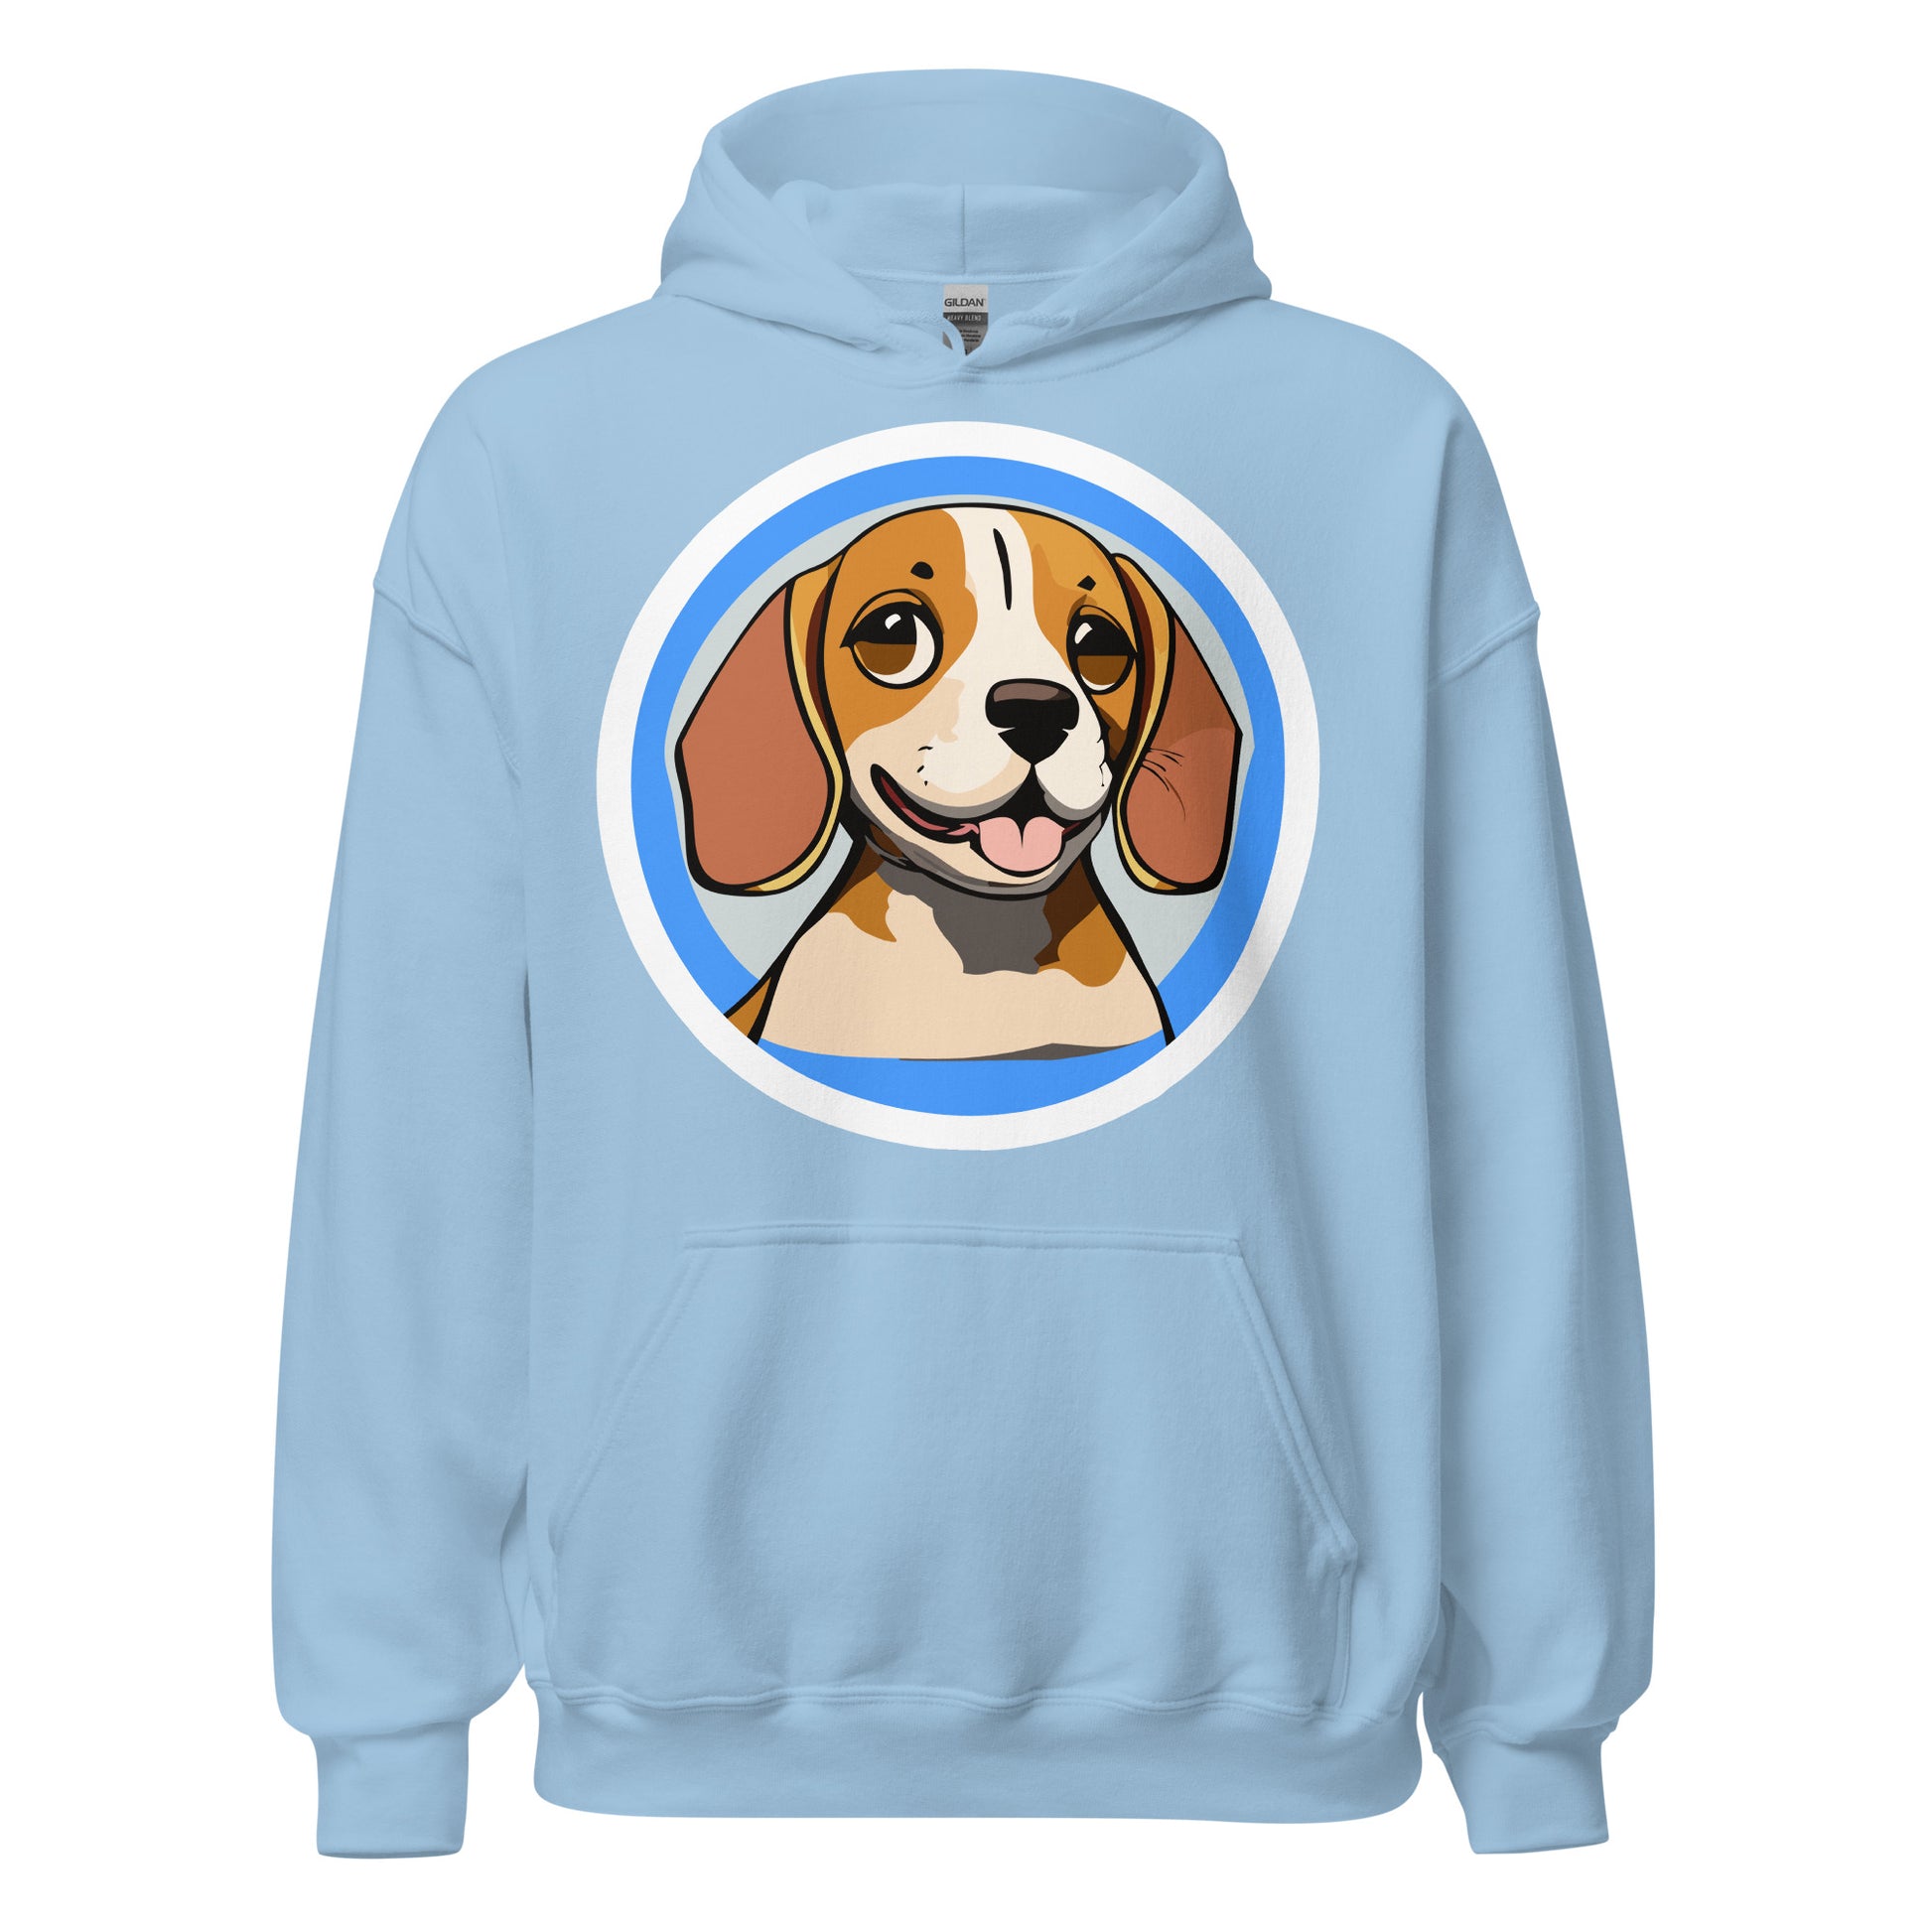 Comfy unisex hoodie for him or her with a cute beagle image, in light blue color